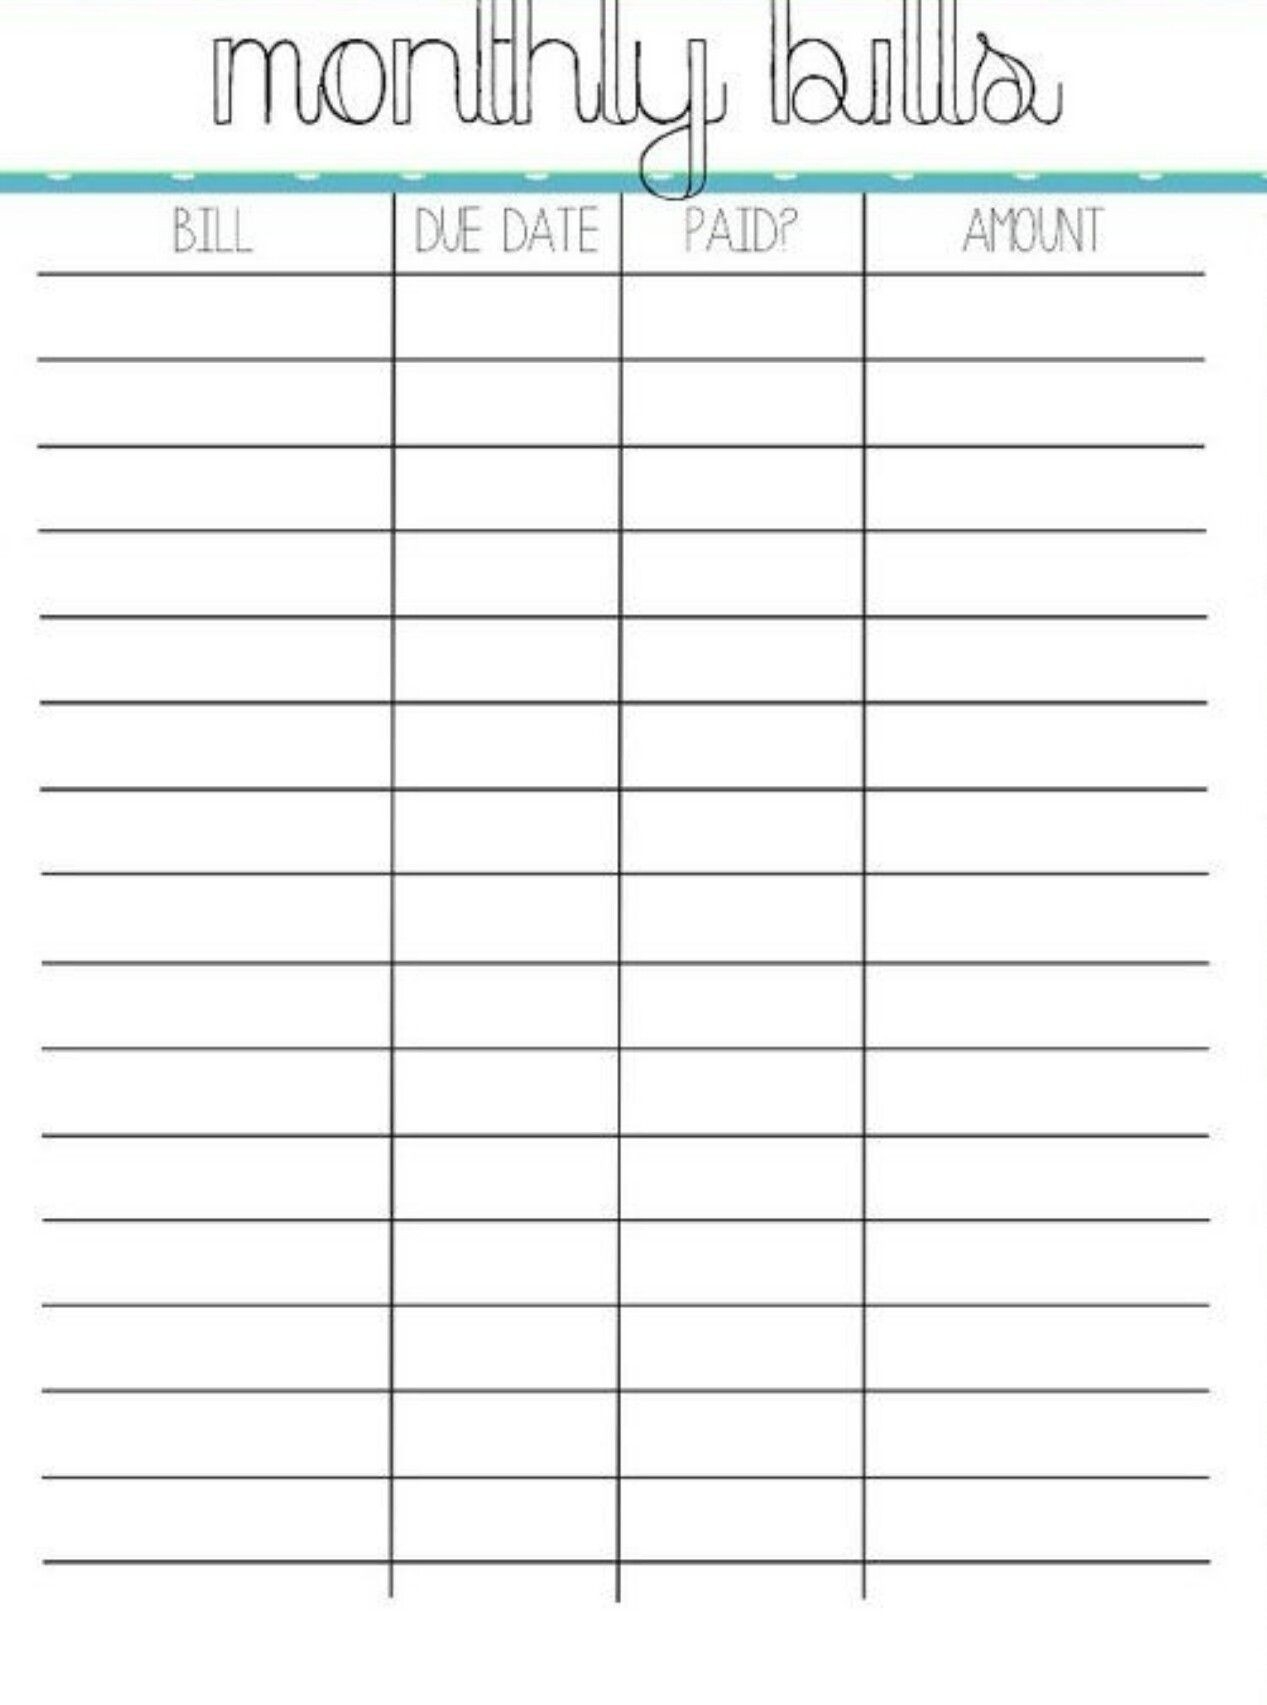 Pin By Crystal On Bills | Organizing Monthly Bills, Bill-Free Bill Pay Templates Printable